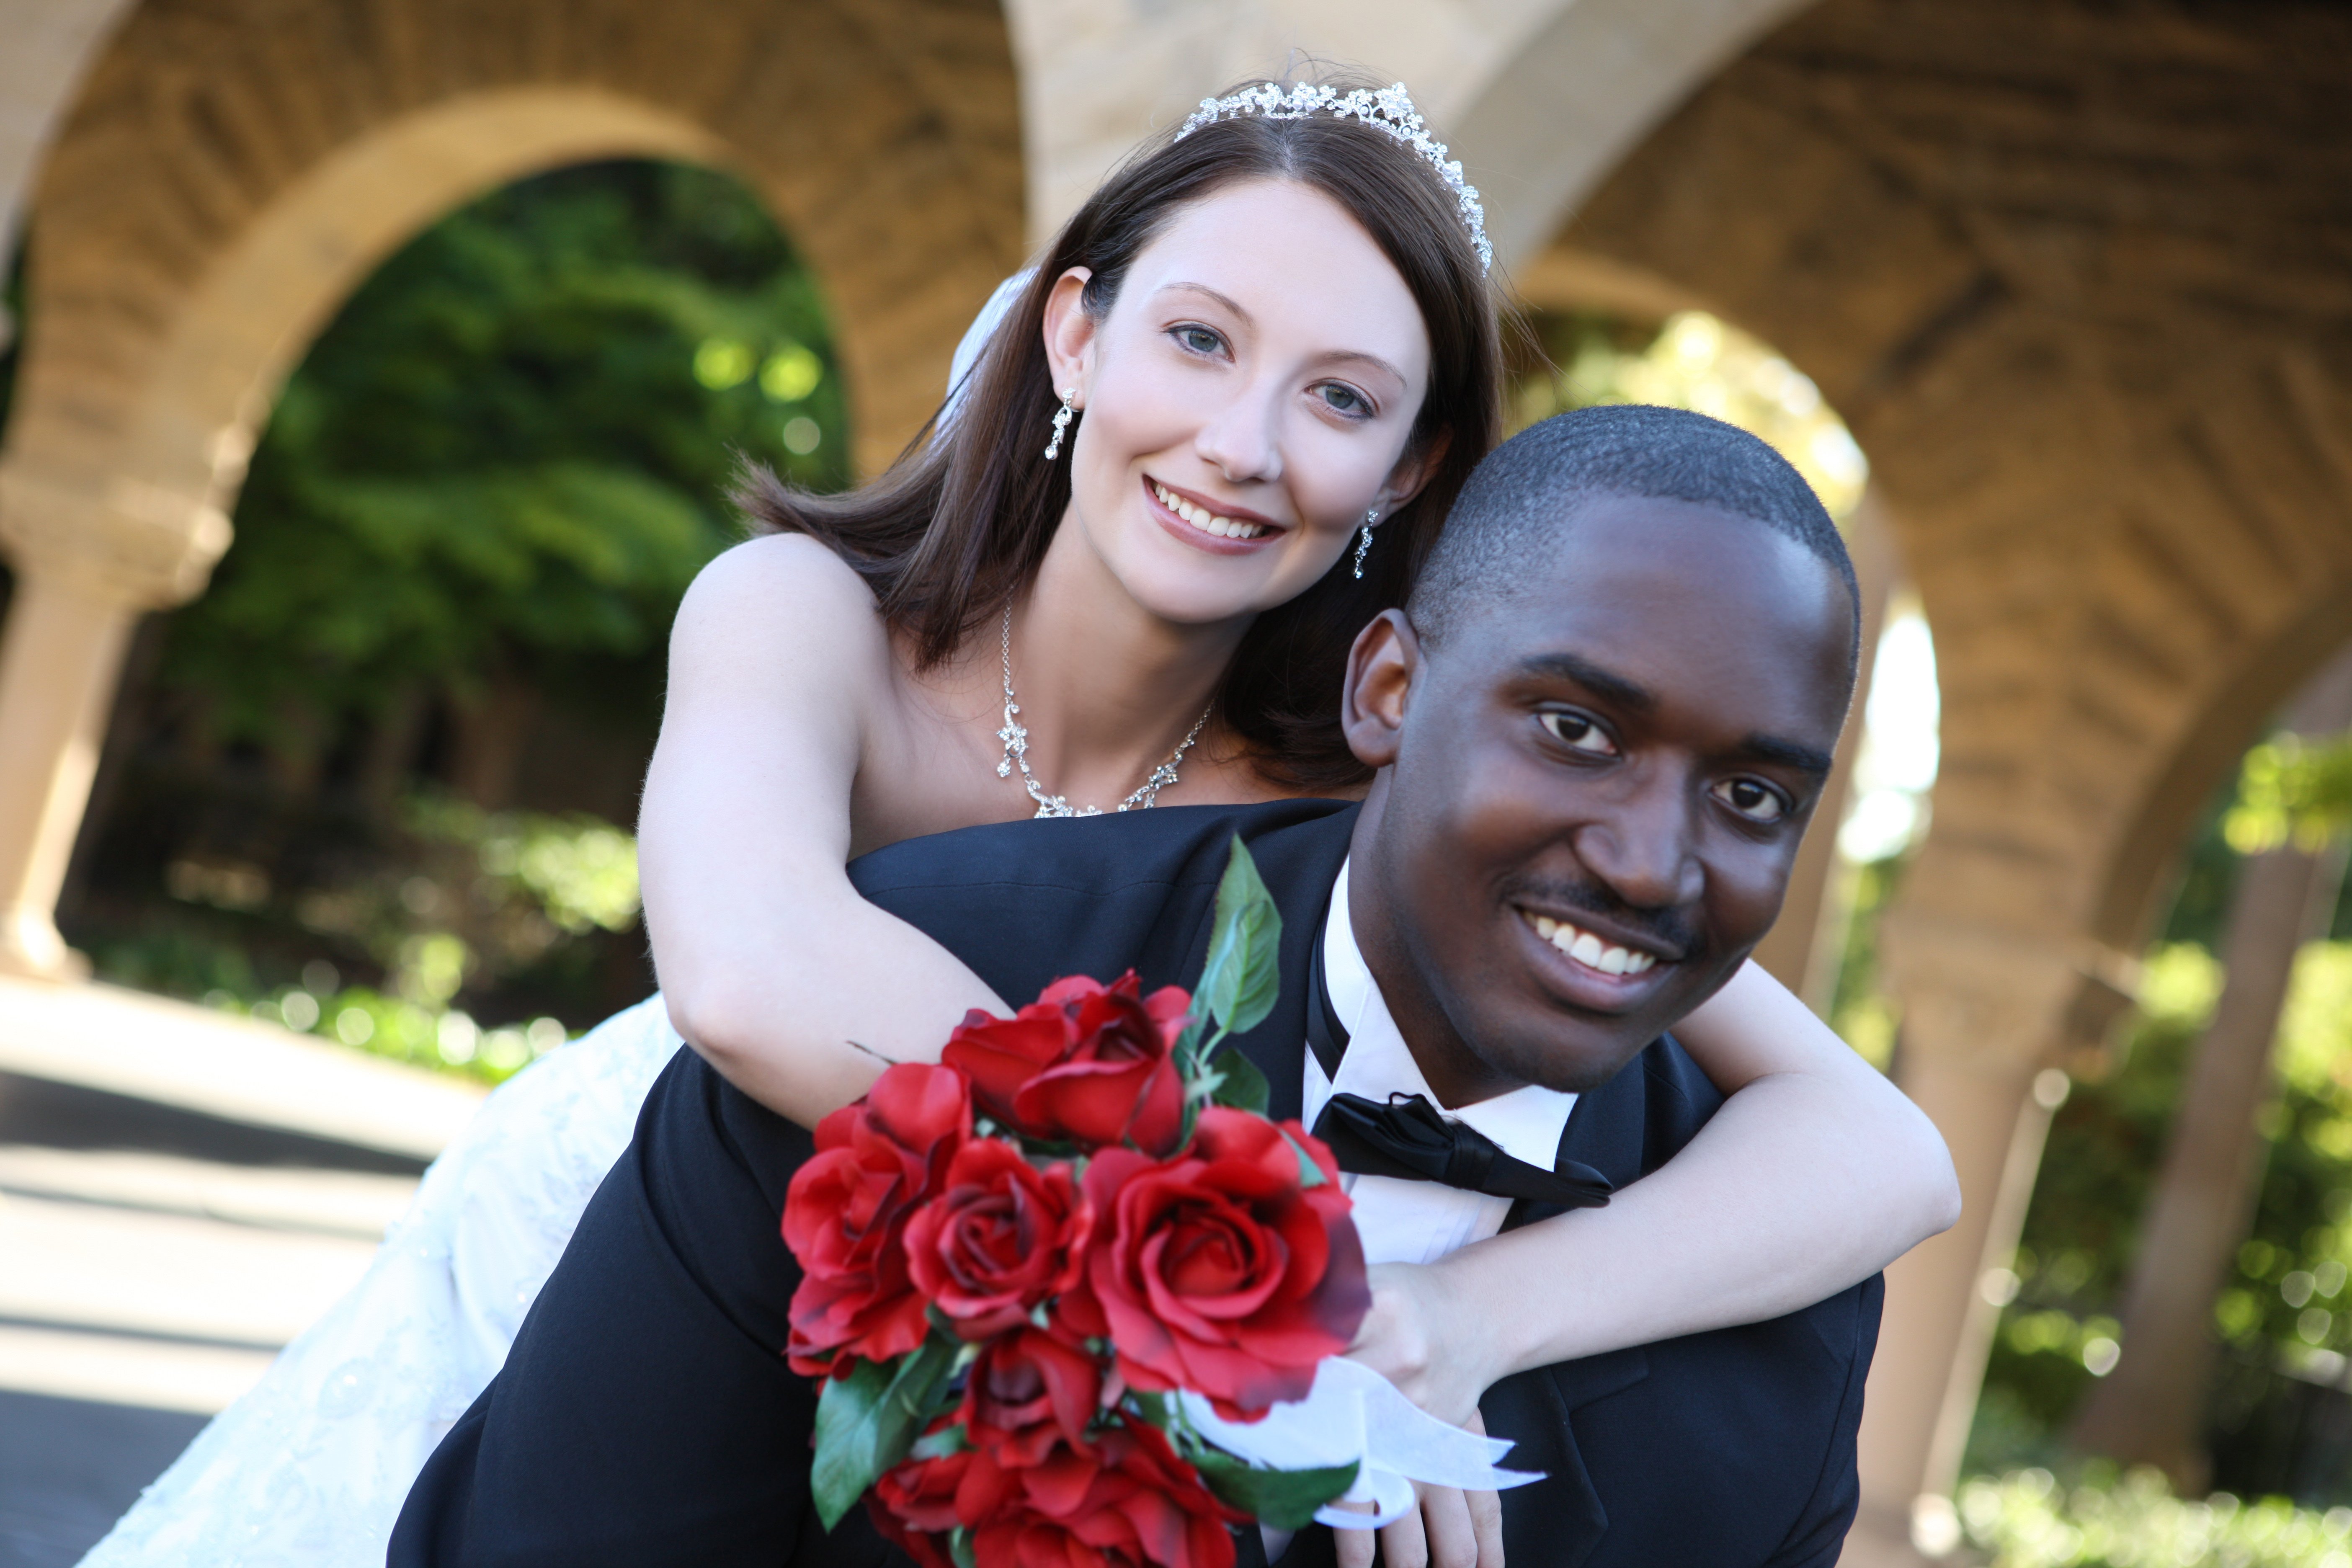 Information against interracial dating